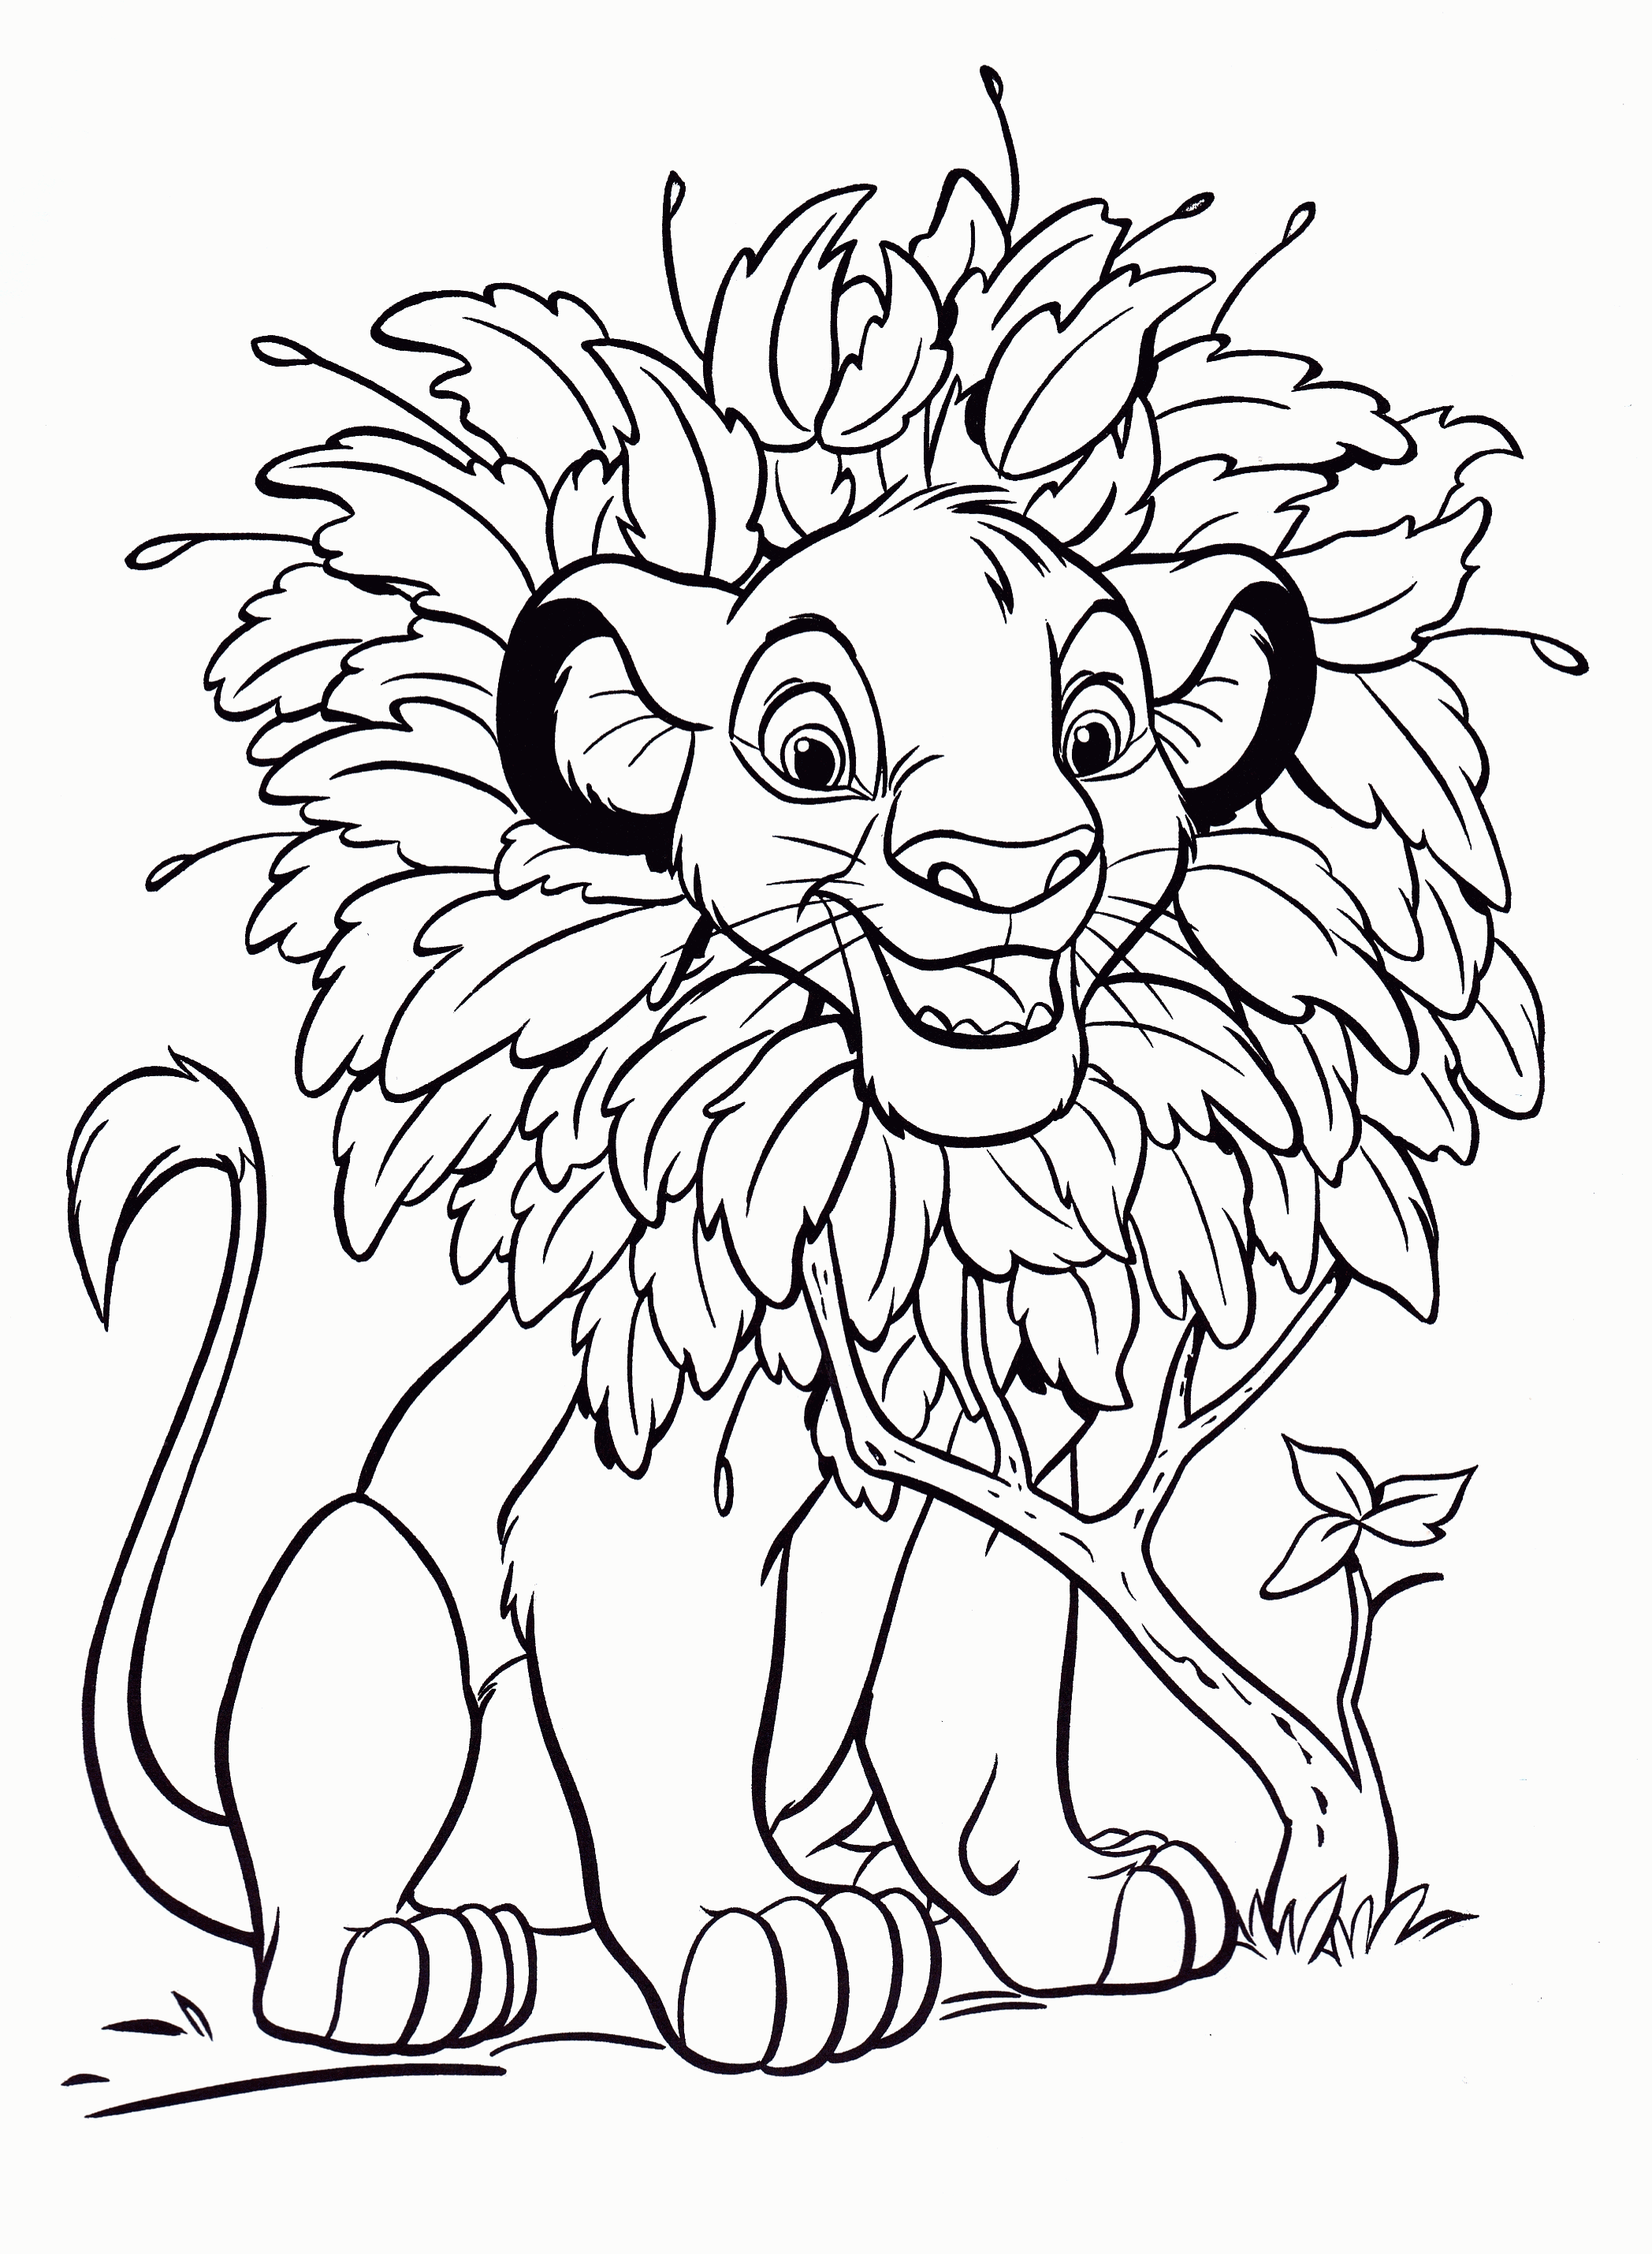 Coloring Book Pages Disney Characters | Coloring - Clip Art Library